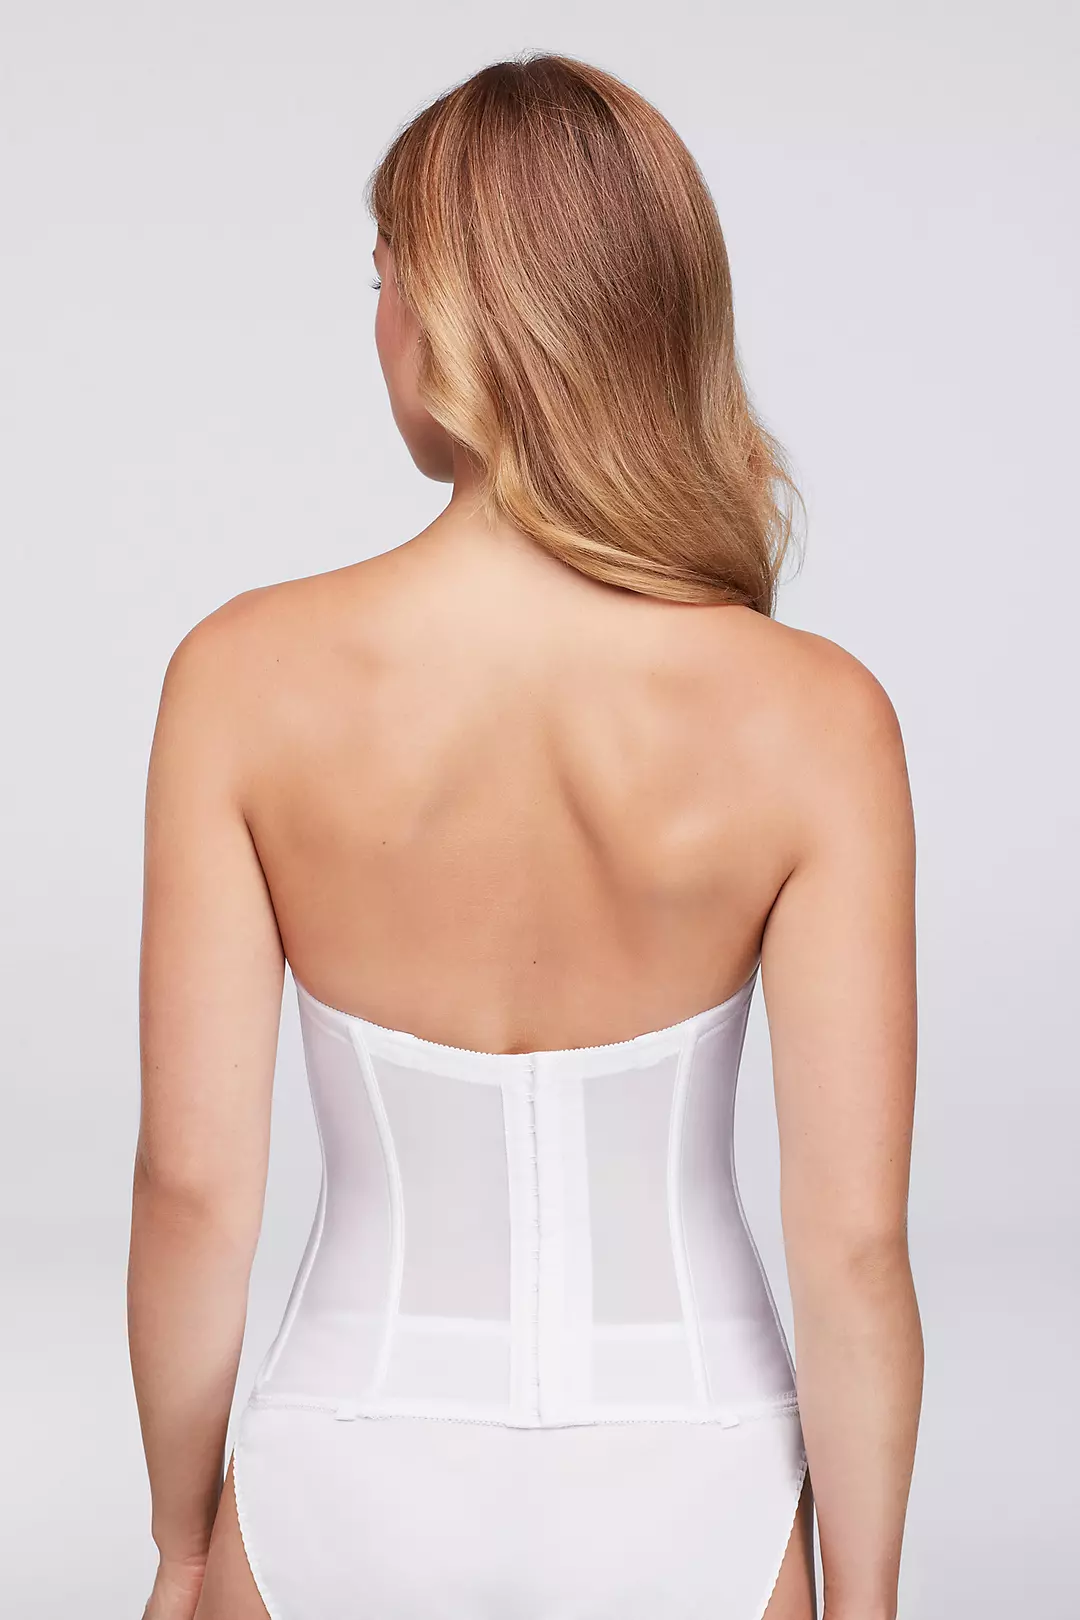 David's Bridal Dominique Push-up Brasselette Style 7759, White, 34B at   Women's Clothing store: Bustiers